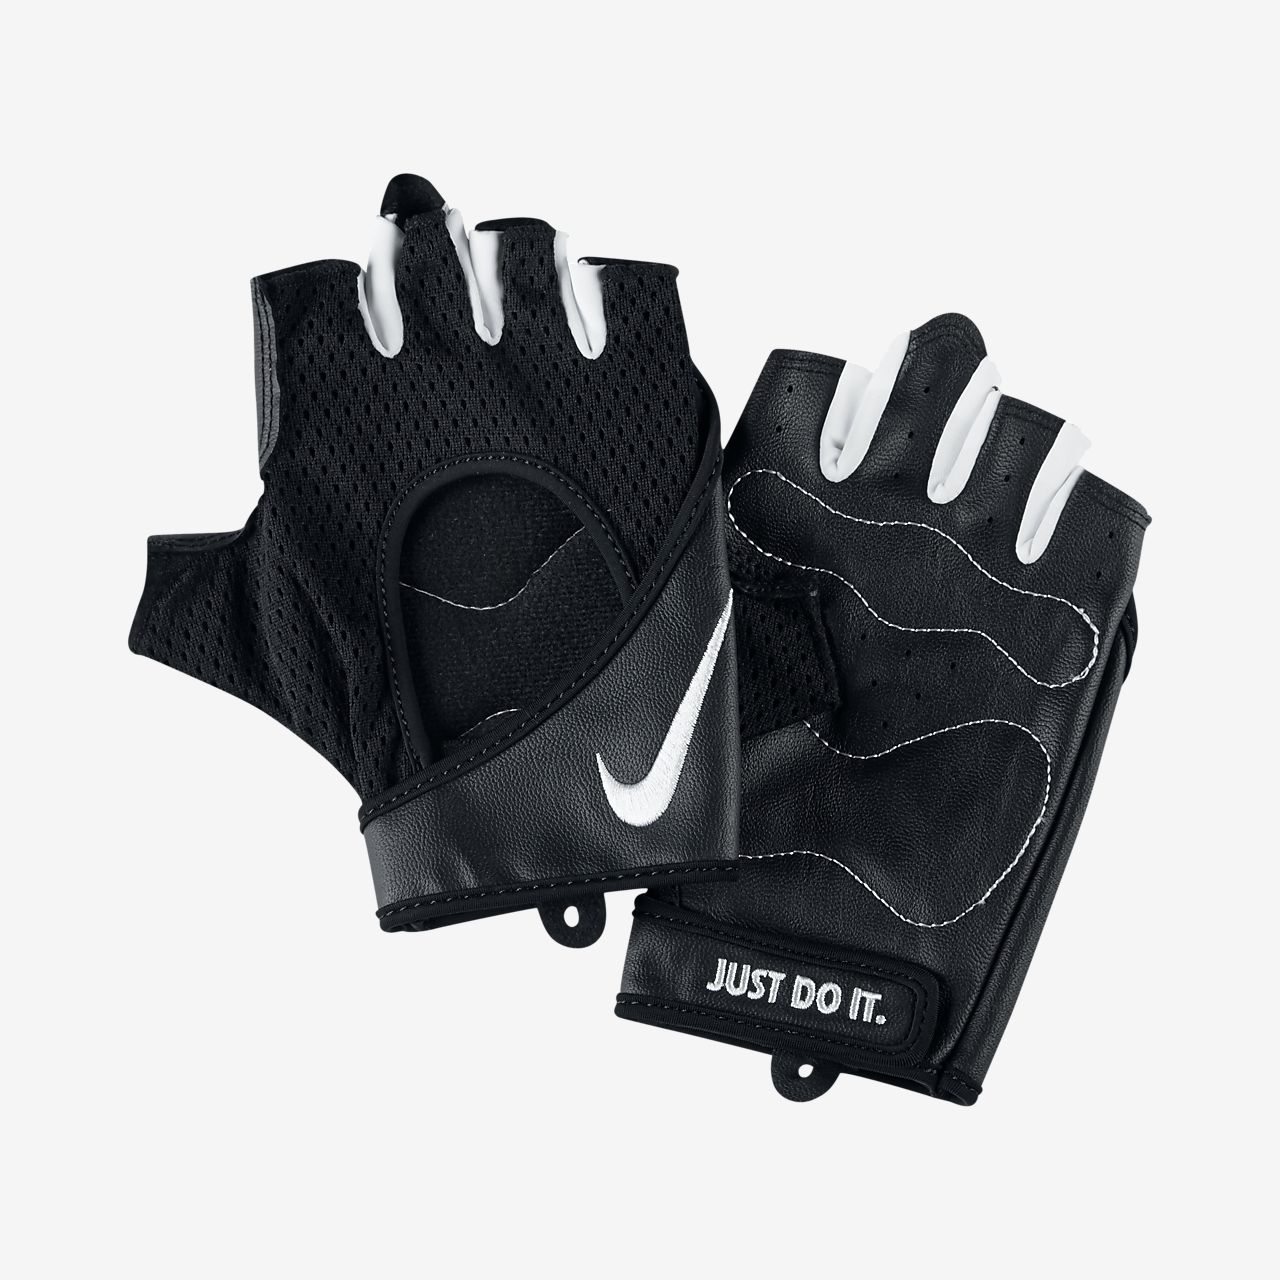 weight lifting gloves nike